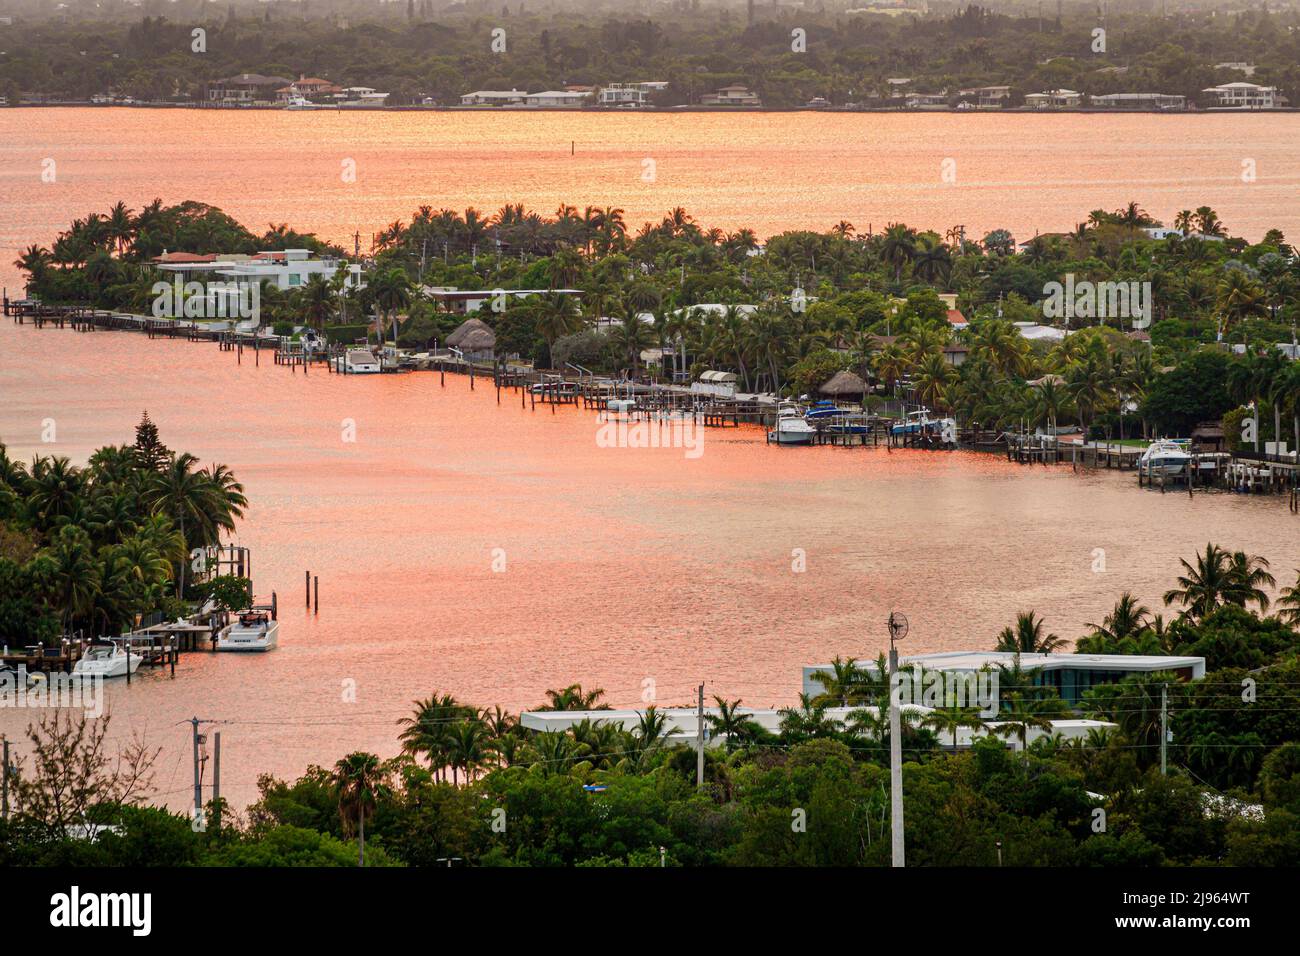 Miami Beach Florida,Biscayne Bay water waterfront homes Biscayne Point sunset Stock Photo